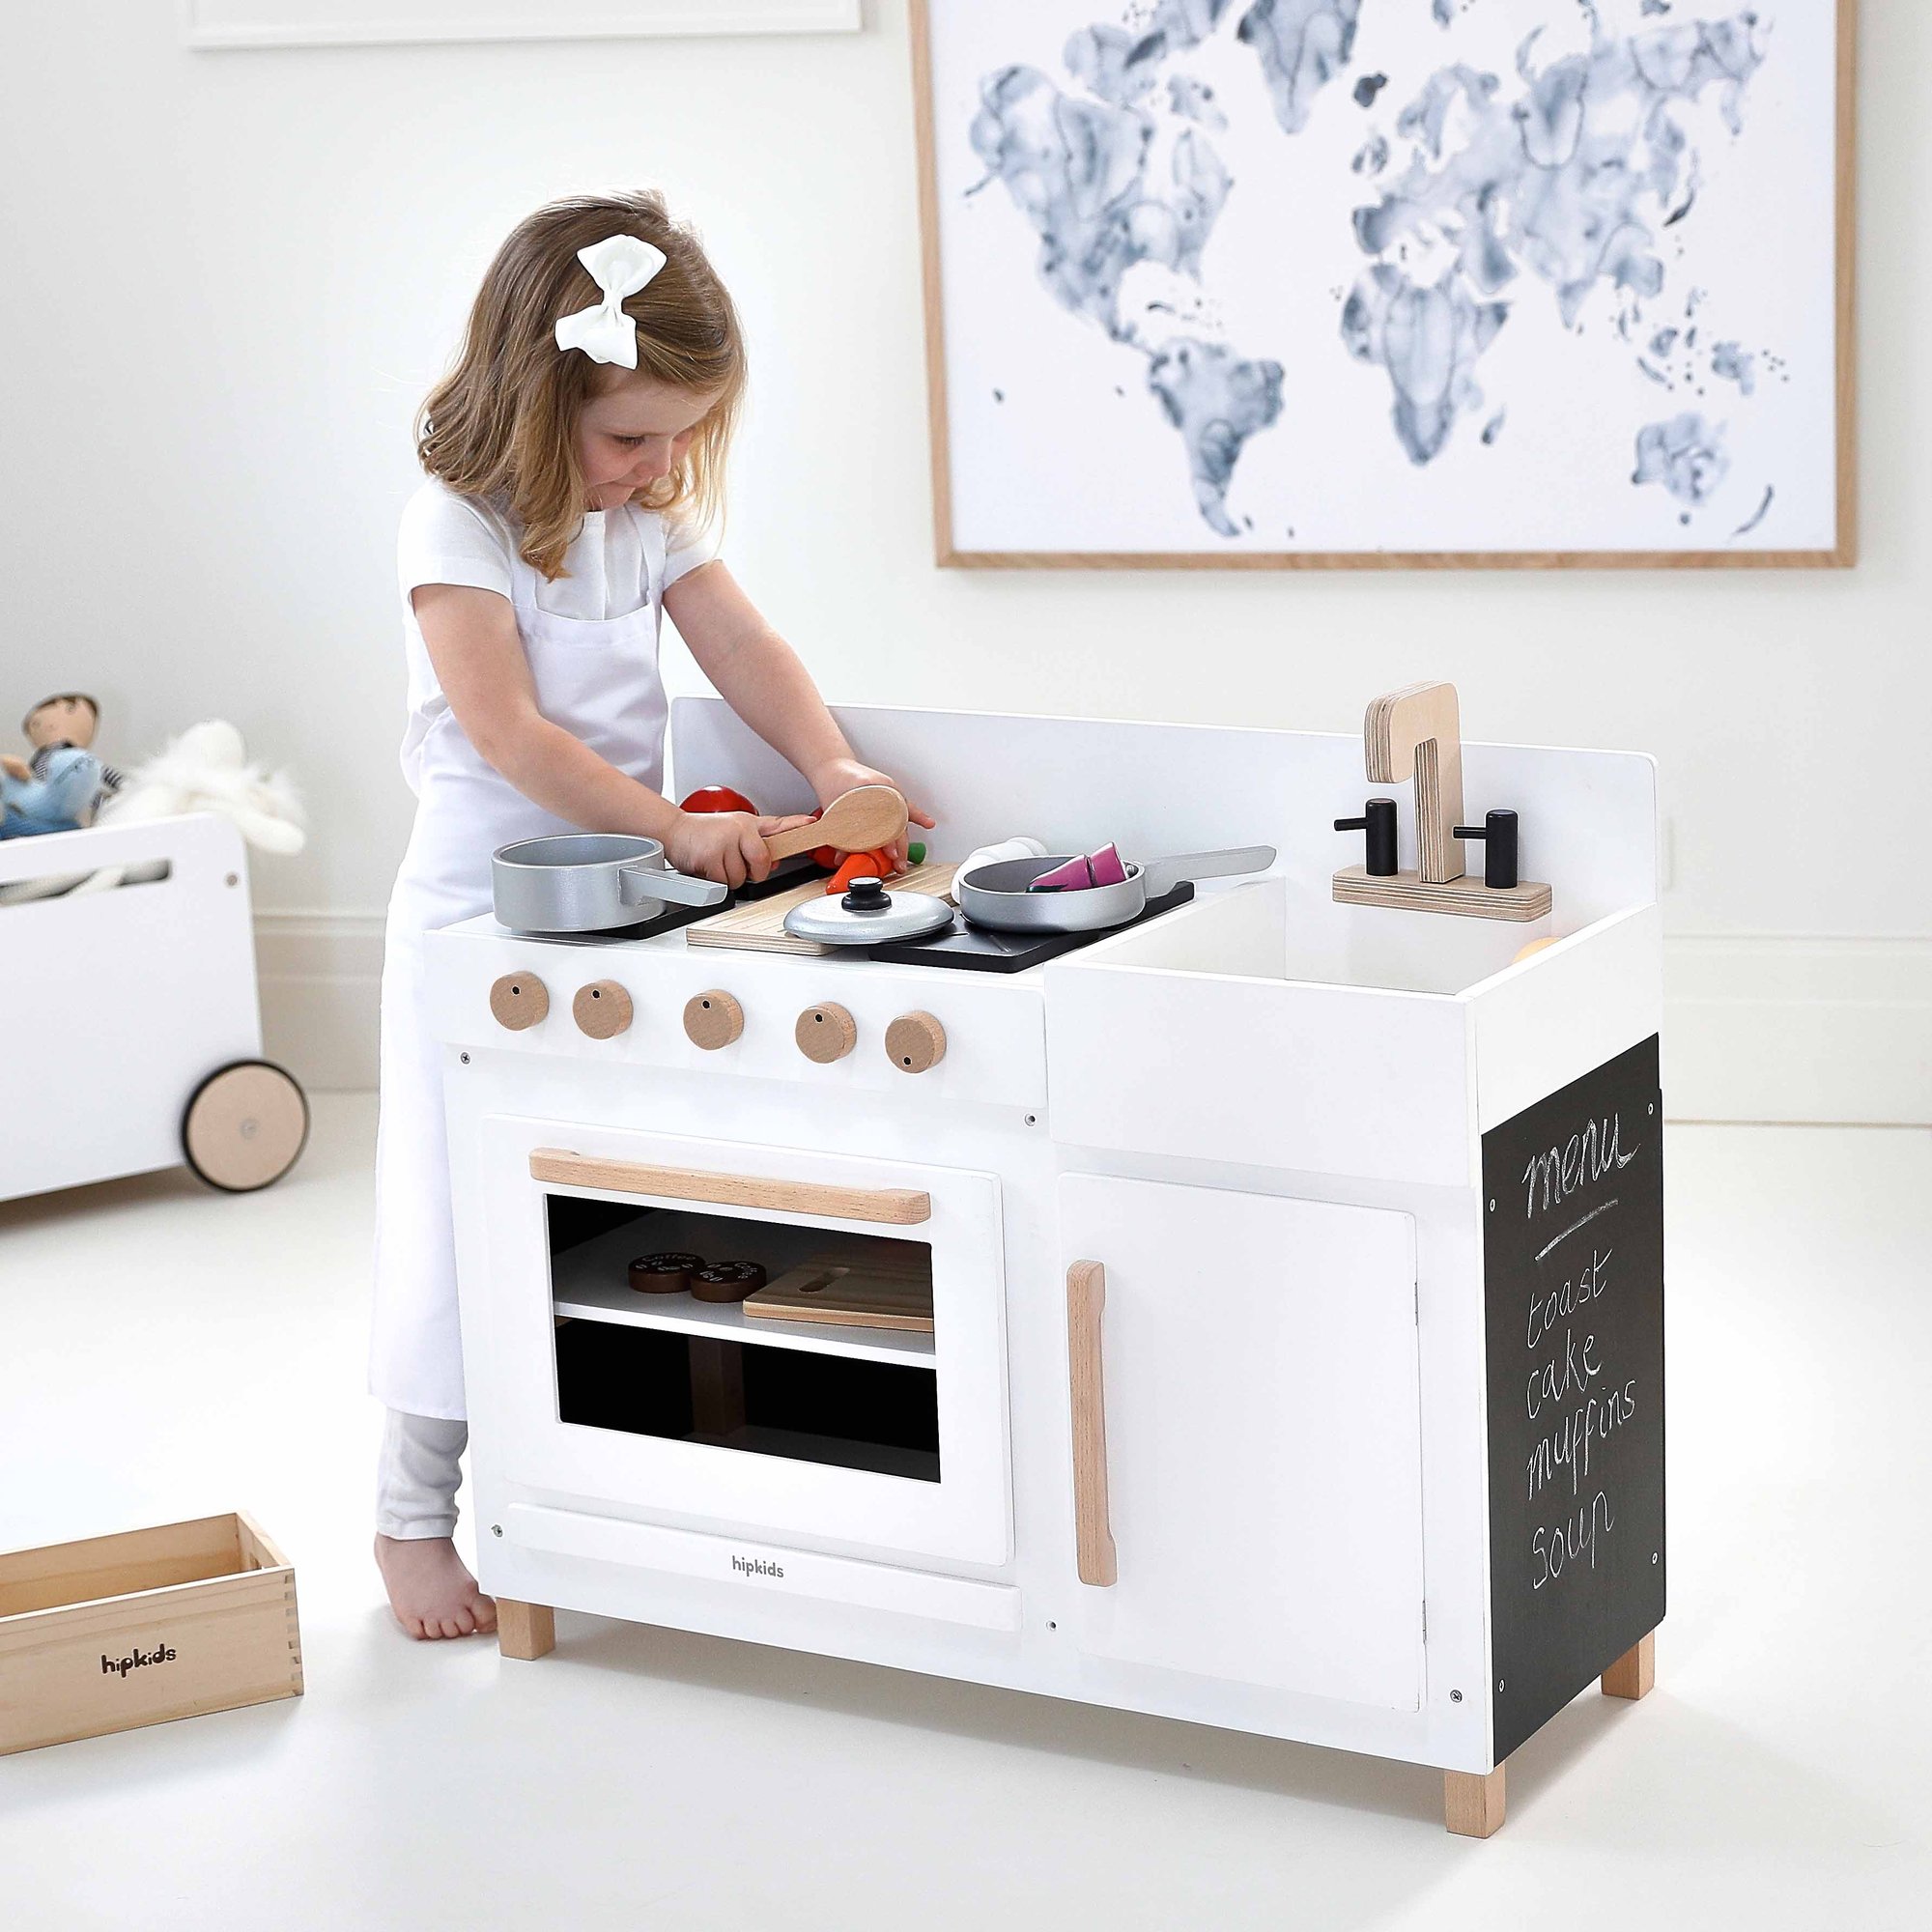 Wooden Toy Kitchens For Toddlers, Wooden Kitchen Playsets For Toddlers